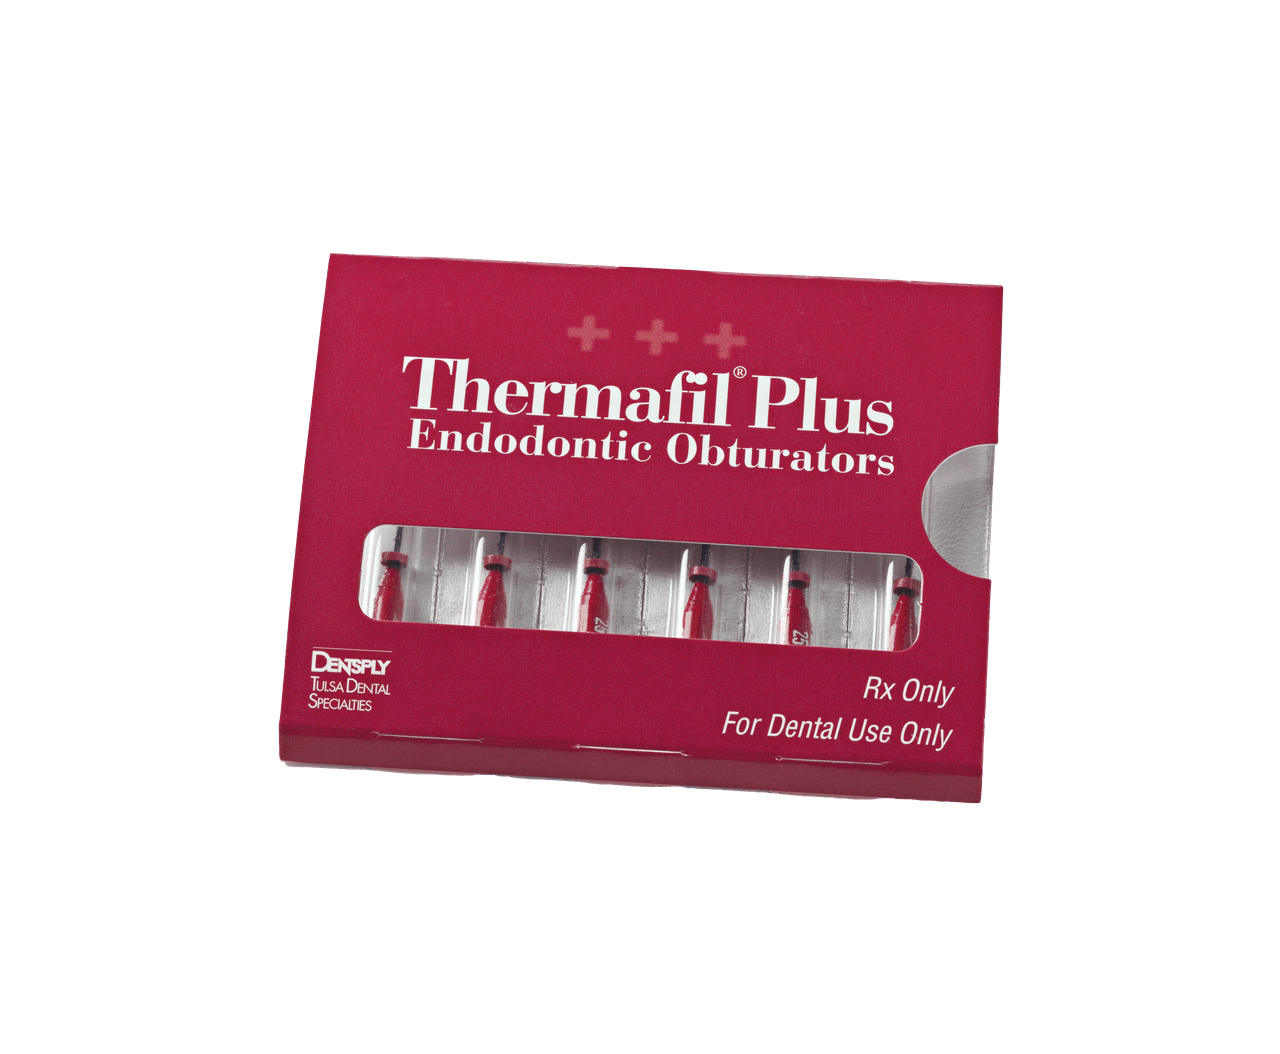 Thermafil plus obturator package